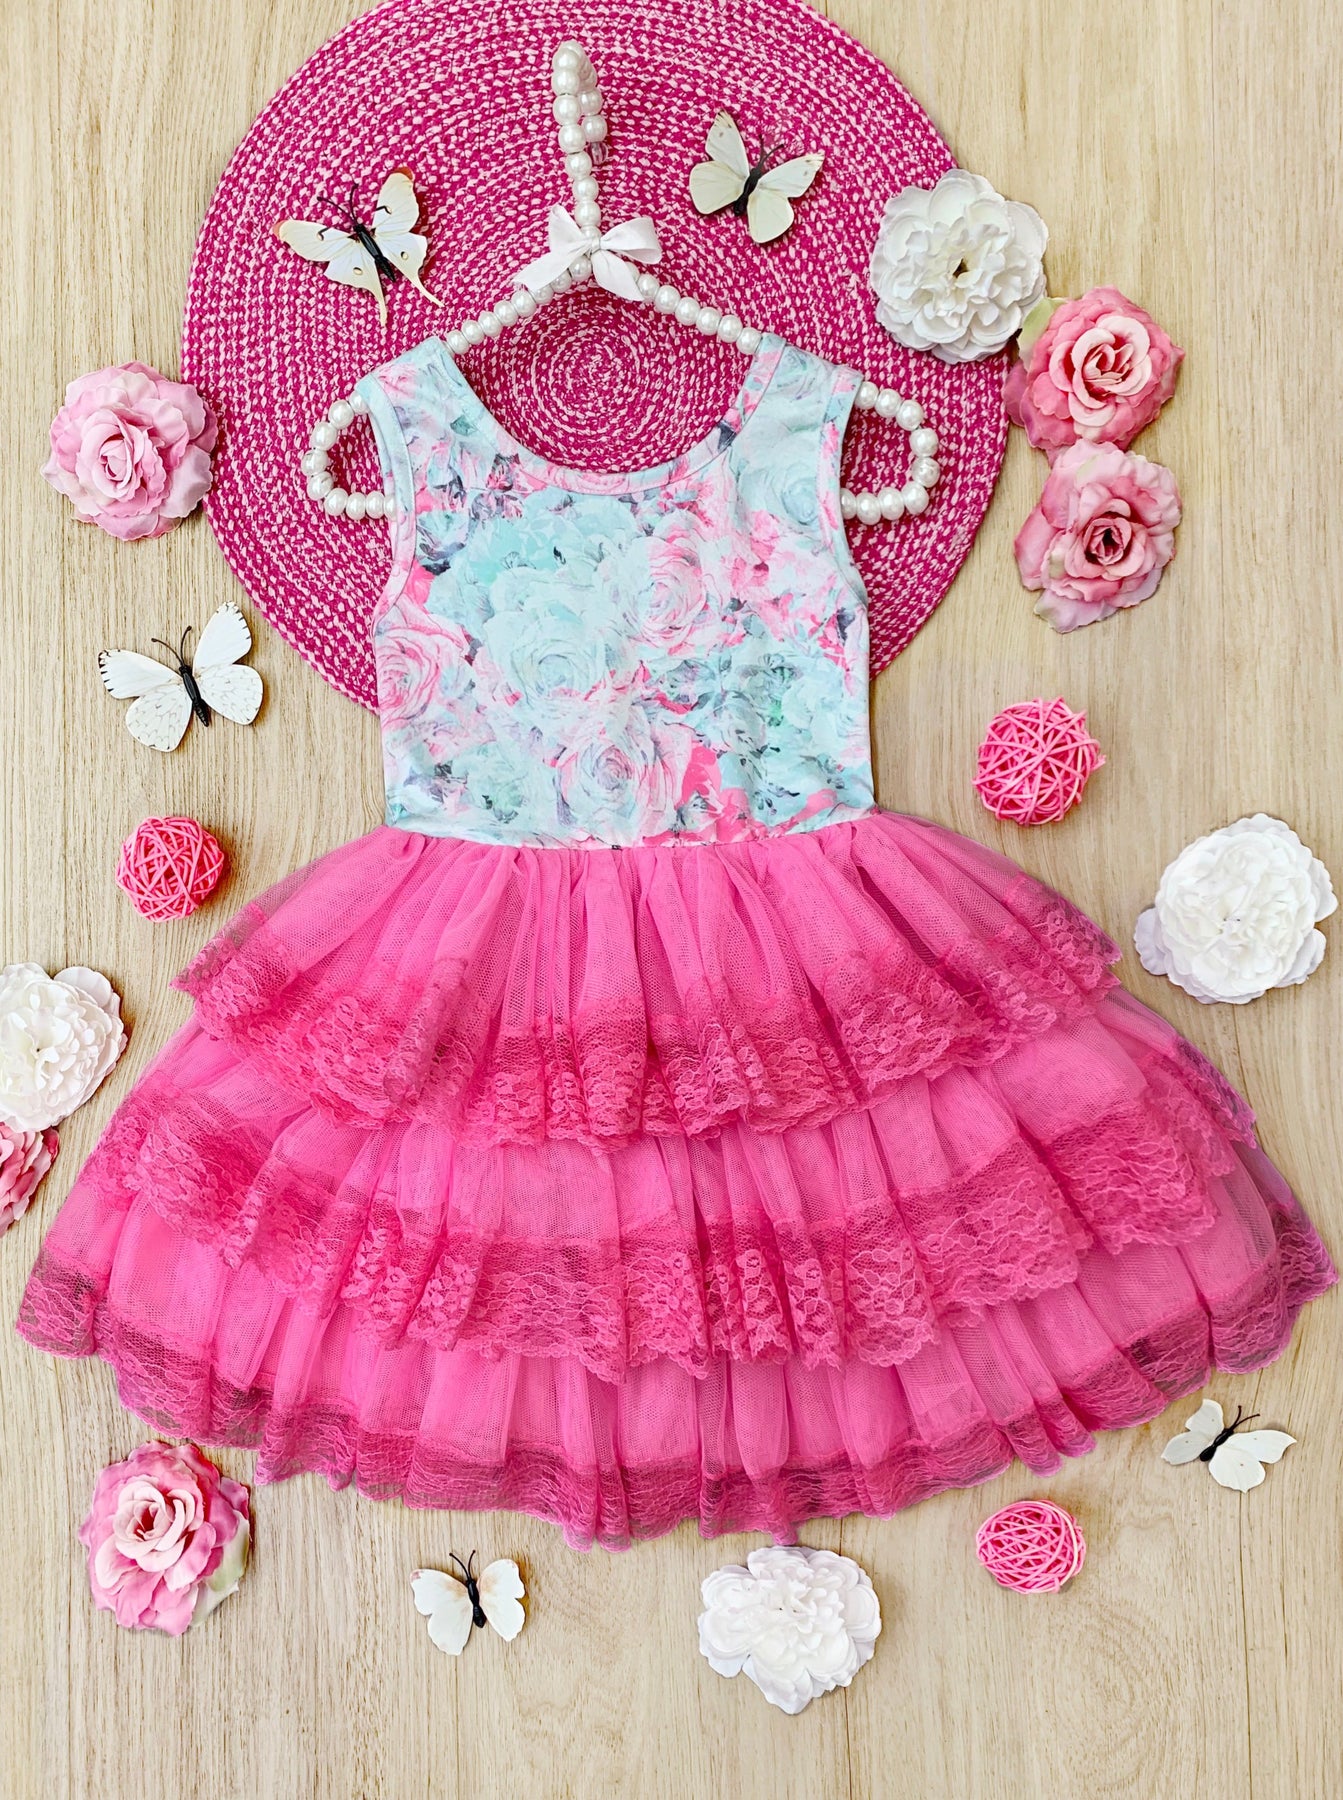 Lovely Spring Days Lace Tiered Ruffle Dress - Mia Belle Girls